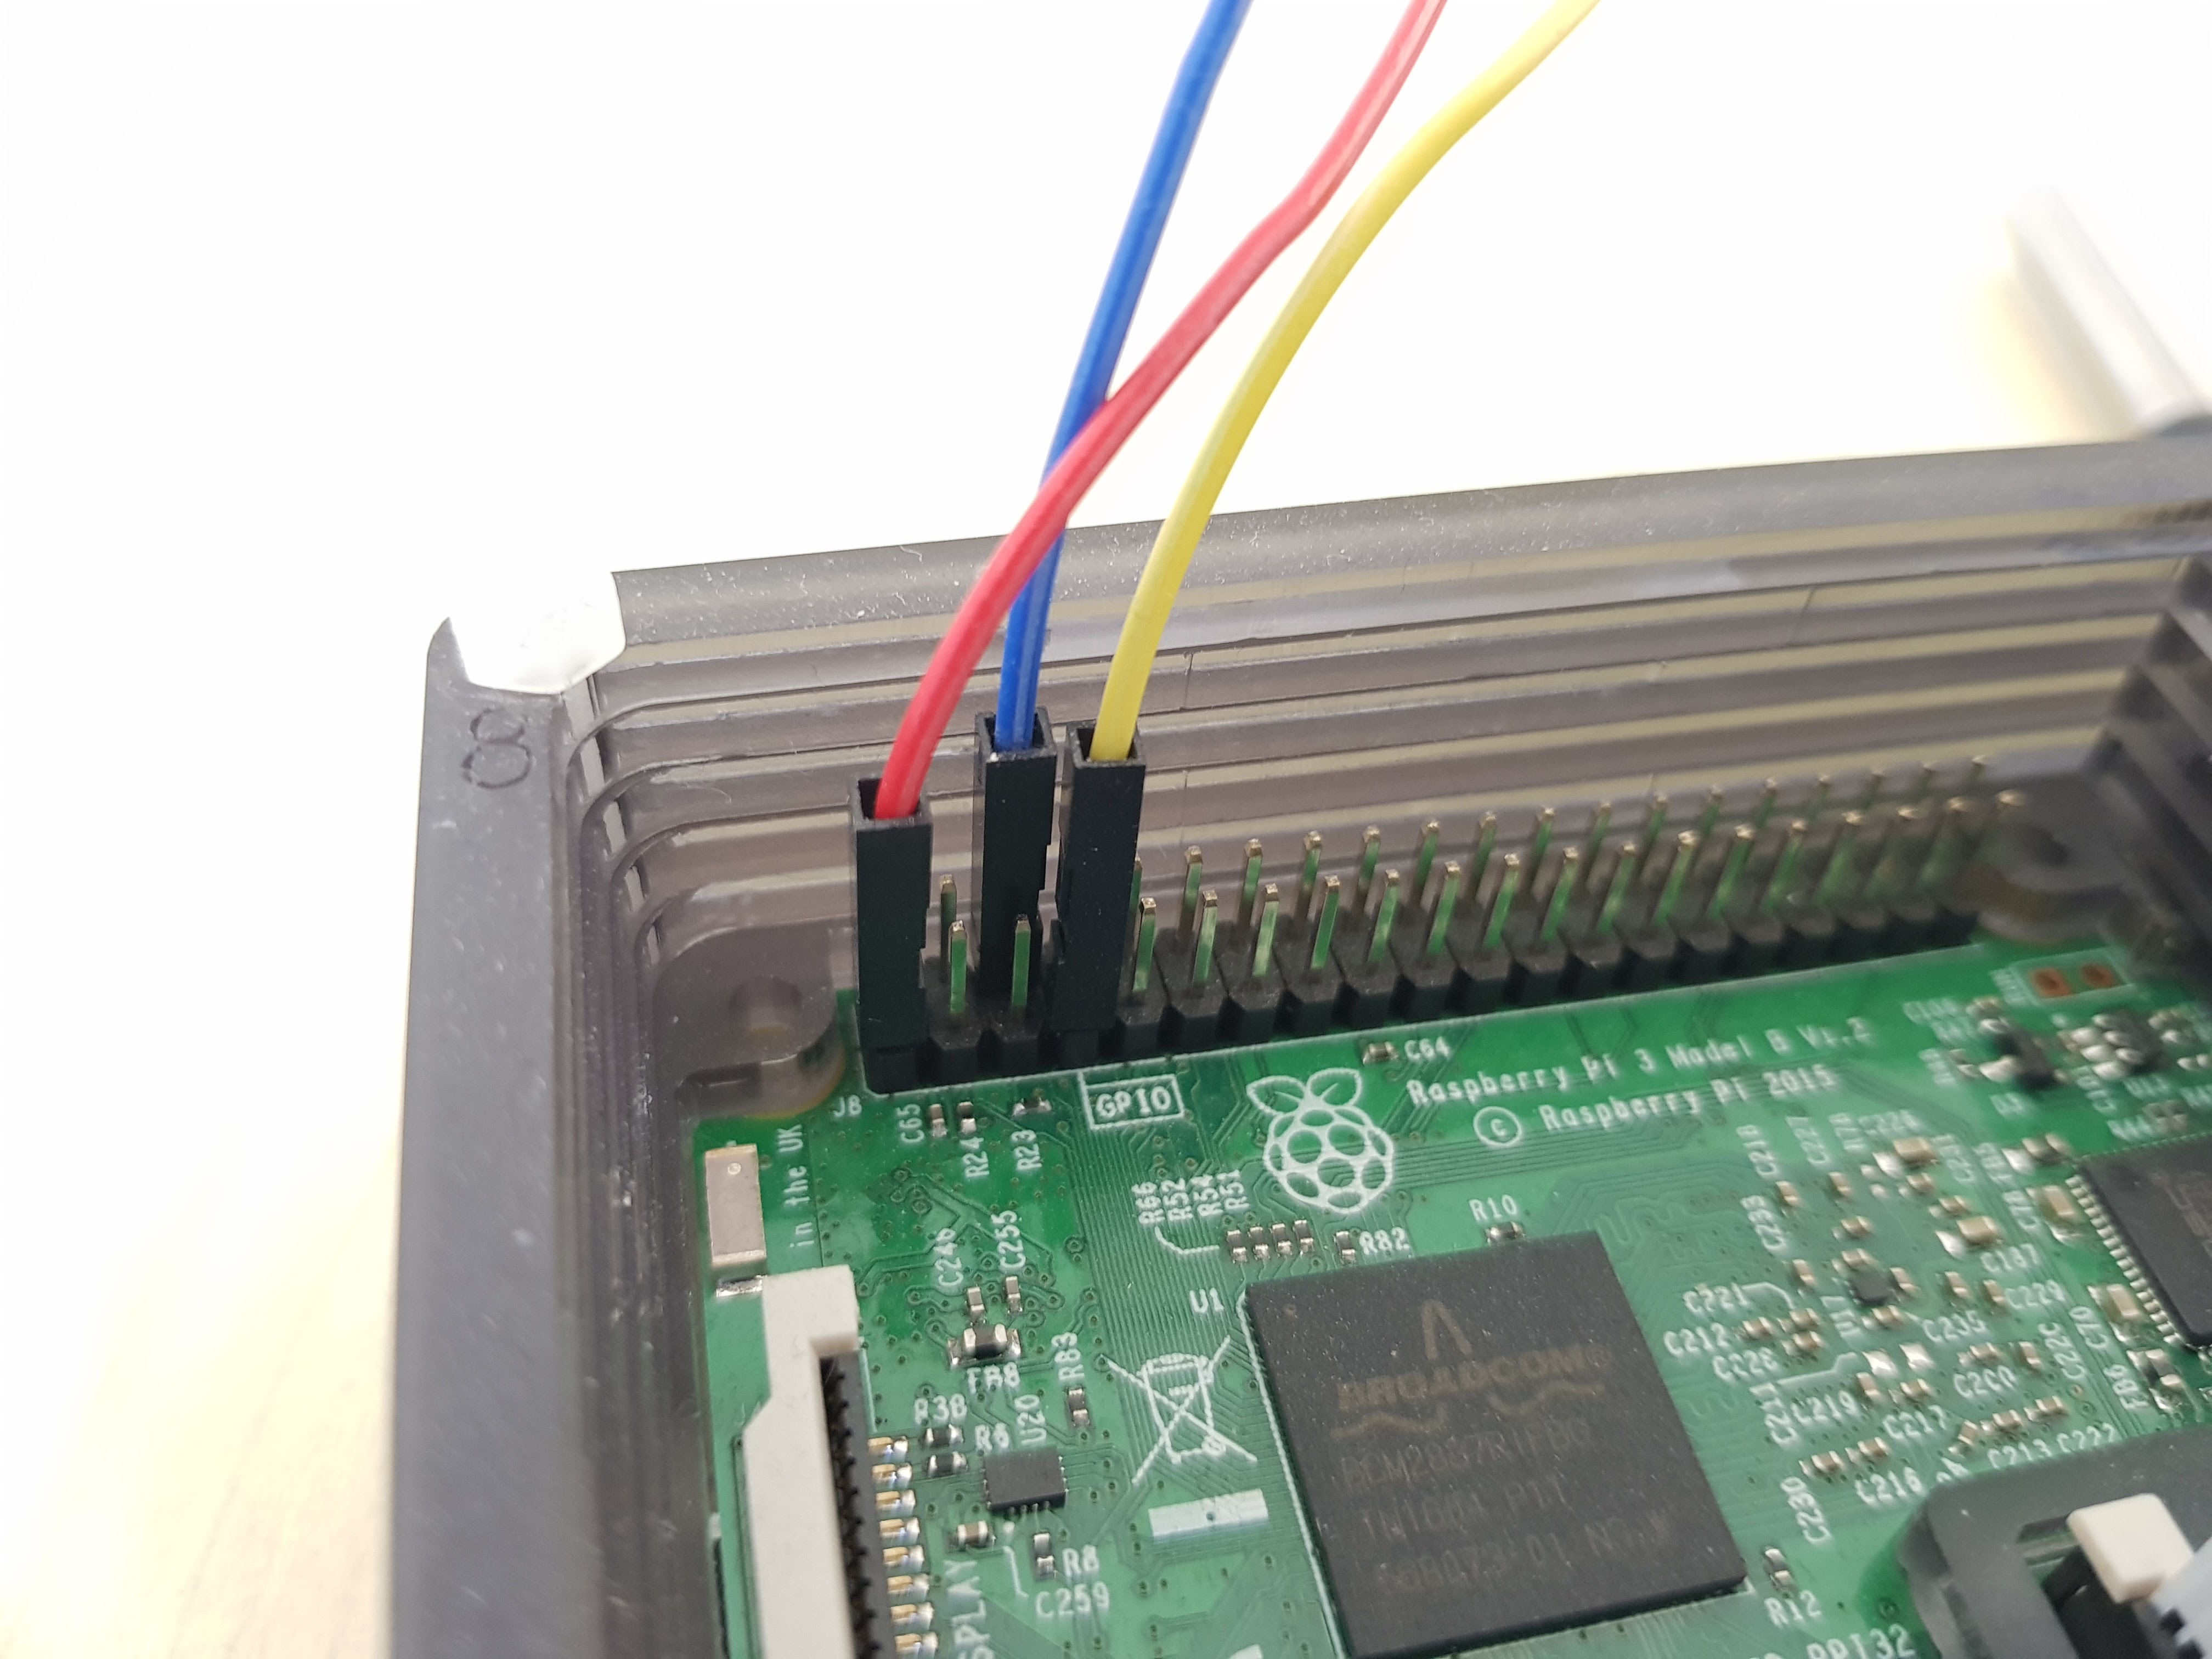 Connecting the jumpers to the GPIO pins